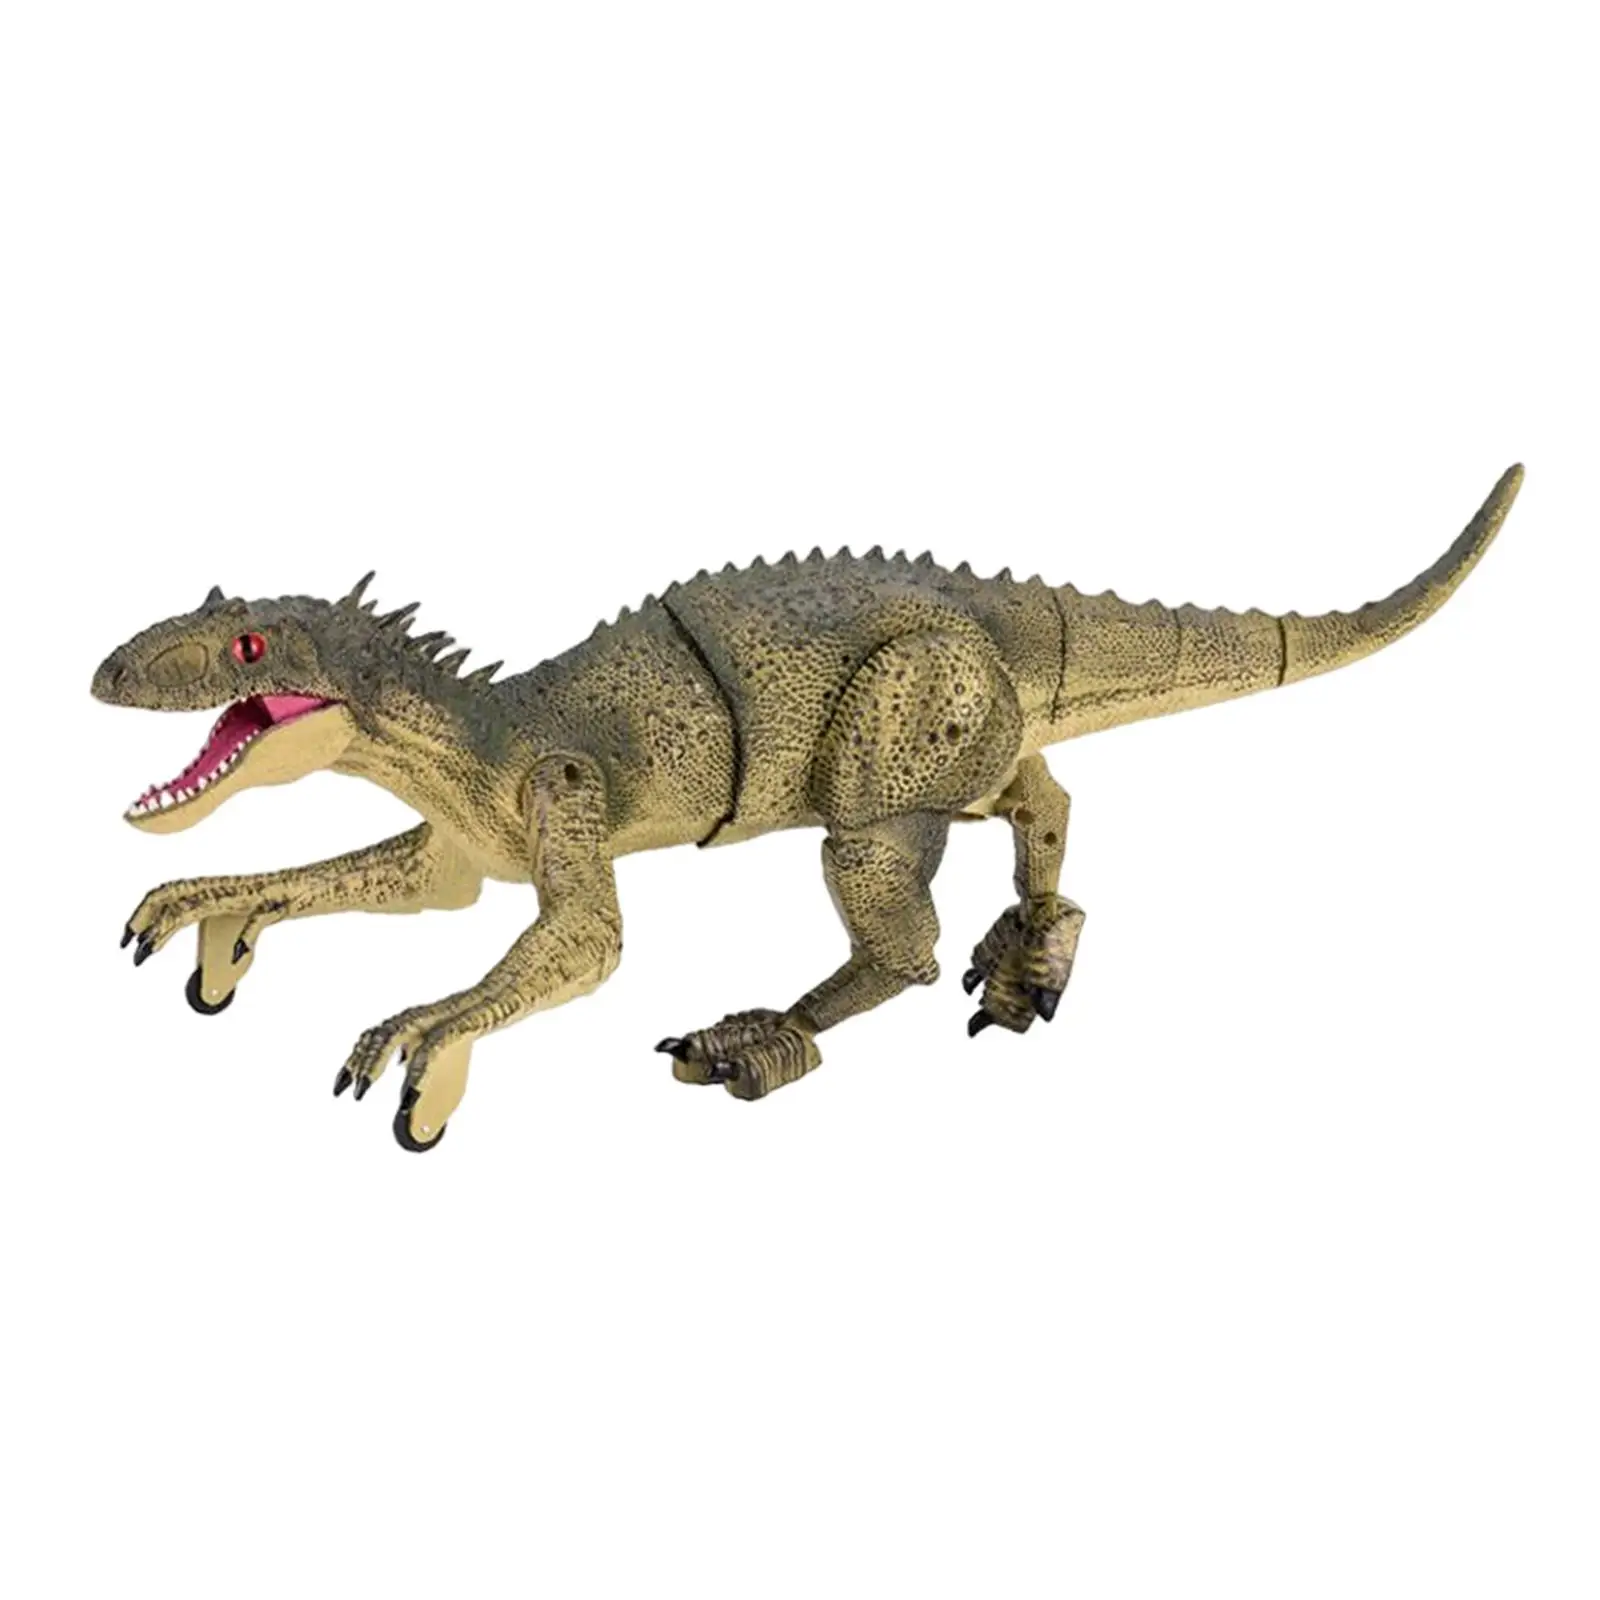 2.4G Dinosaur Toy Realistic with Light Walking Dinosaur Electric Toy RC with Sound Multifunction for Children Girls Boys Gifts